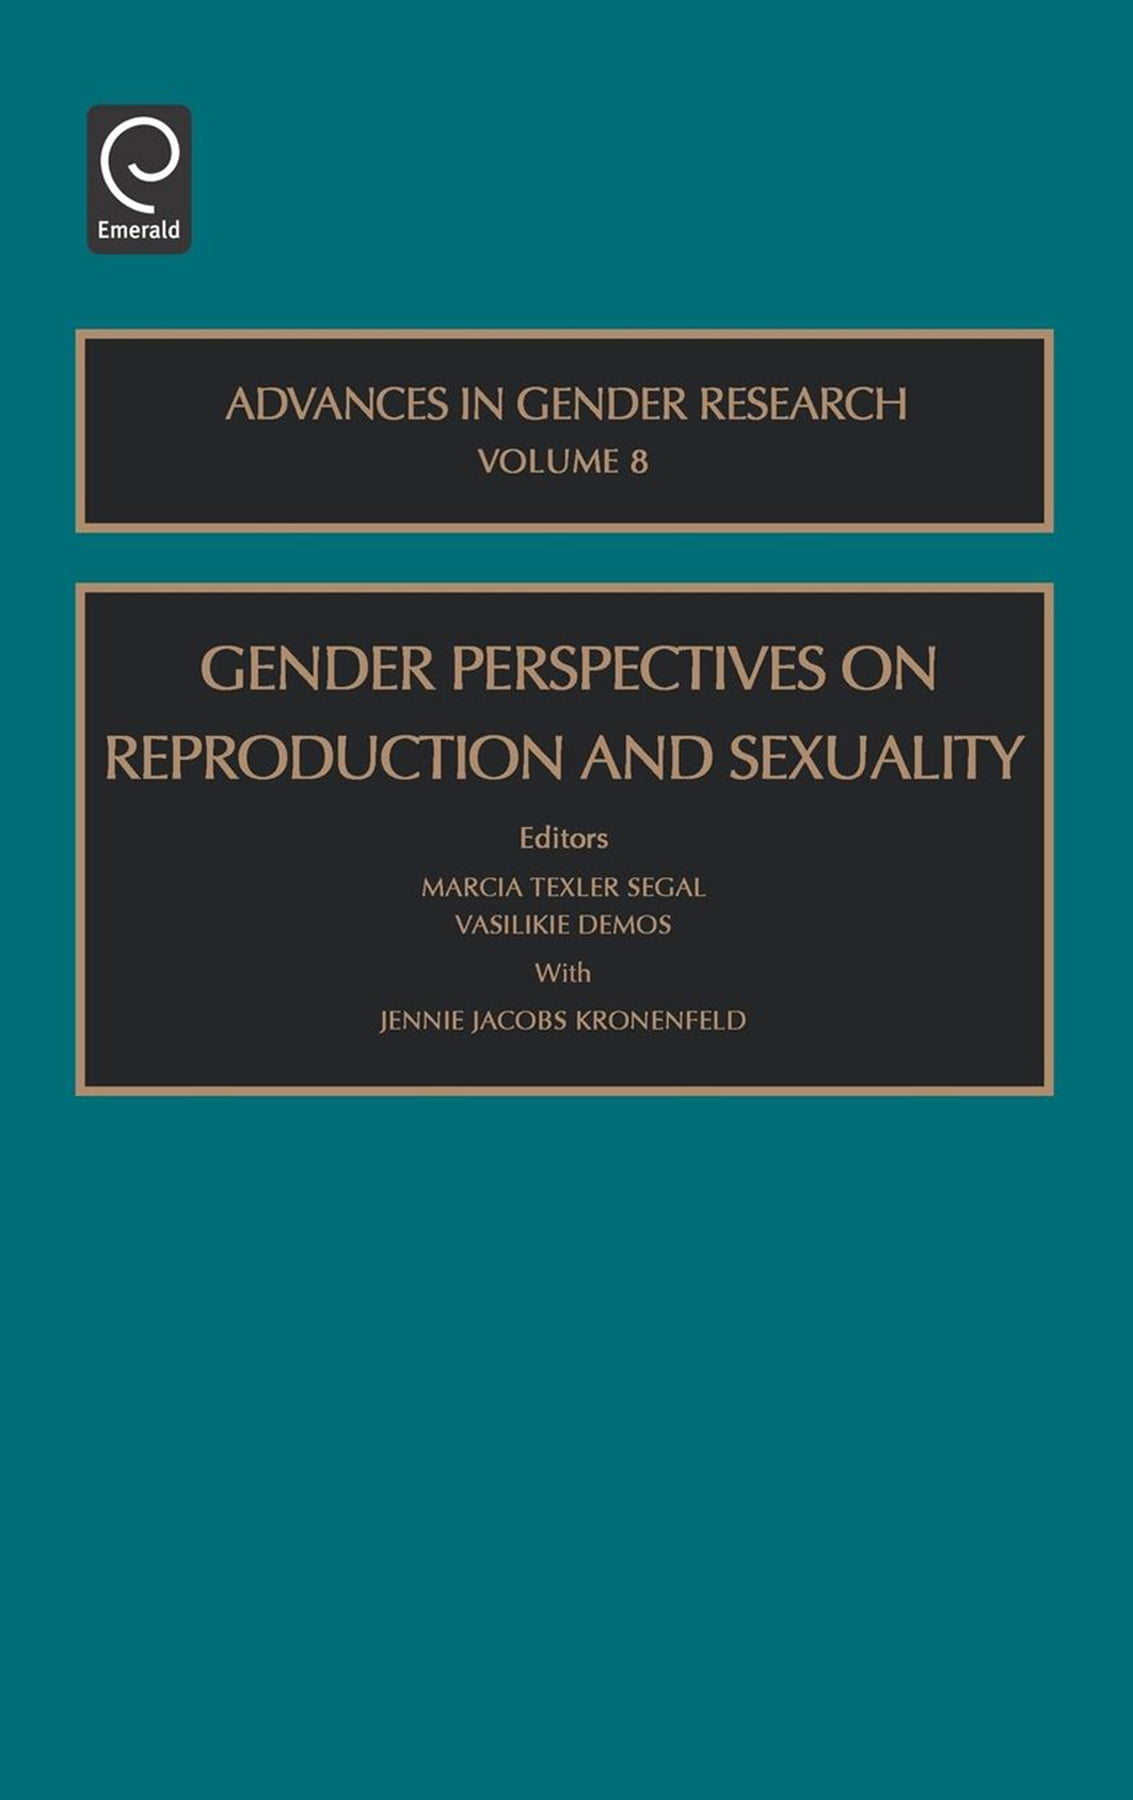 research papers on gender studies